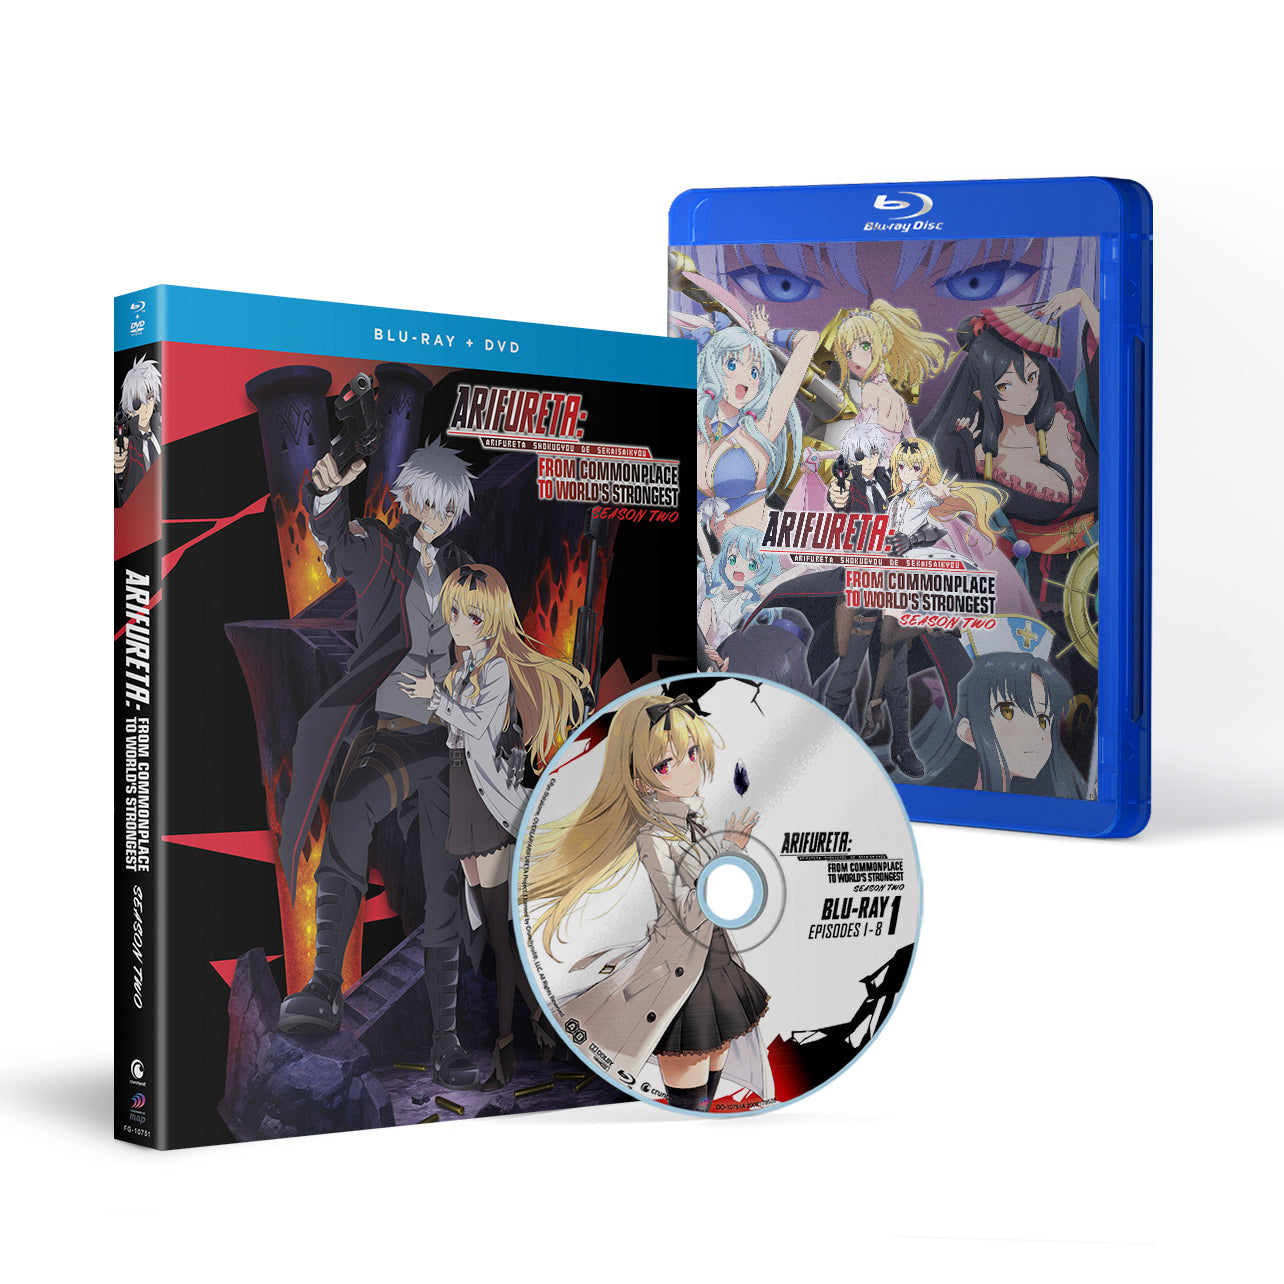 Arifureta: From Commonplace to World's Strongest - Season 2 - BD/DVD - LE image count 6